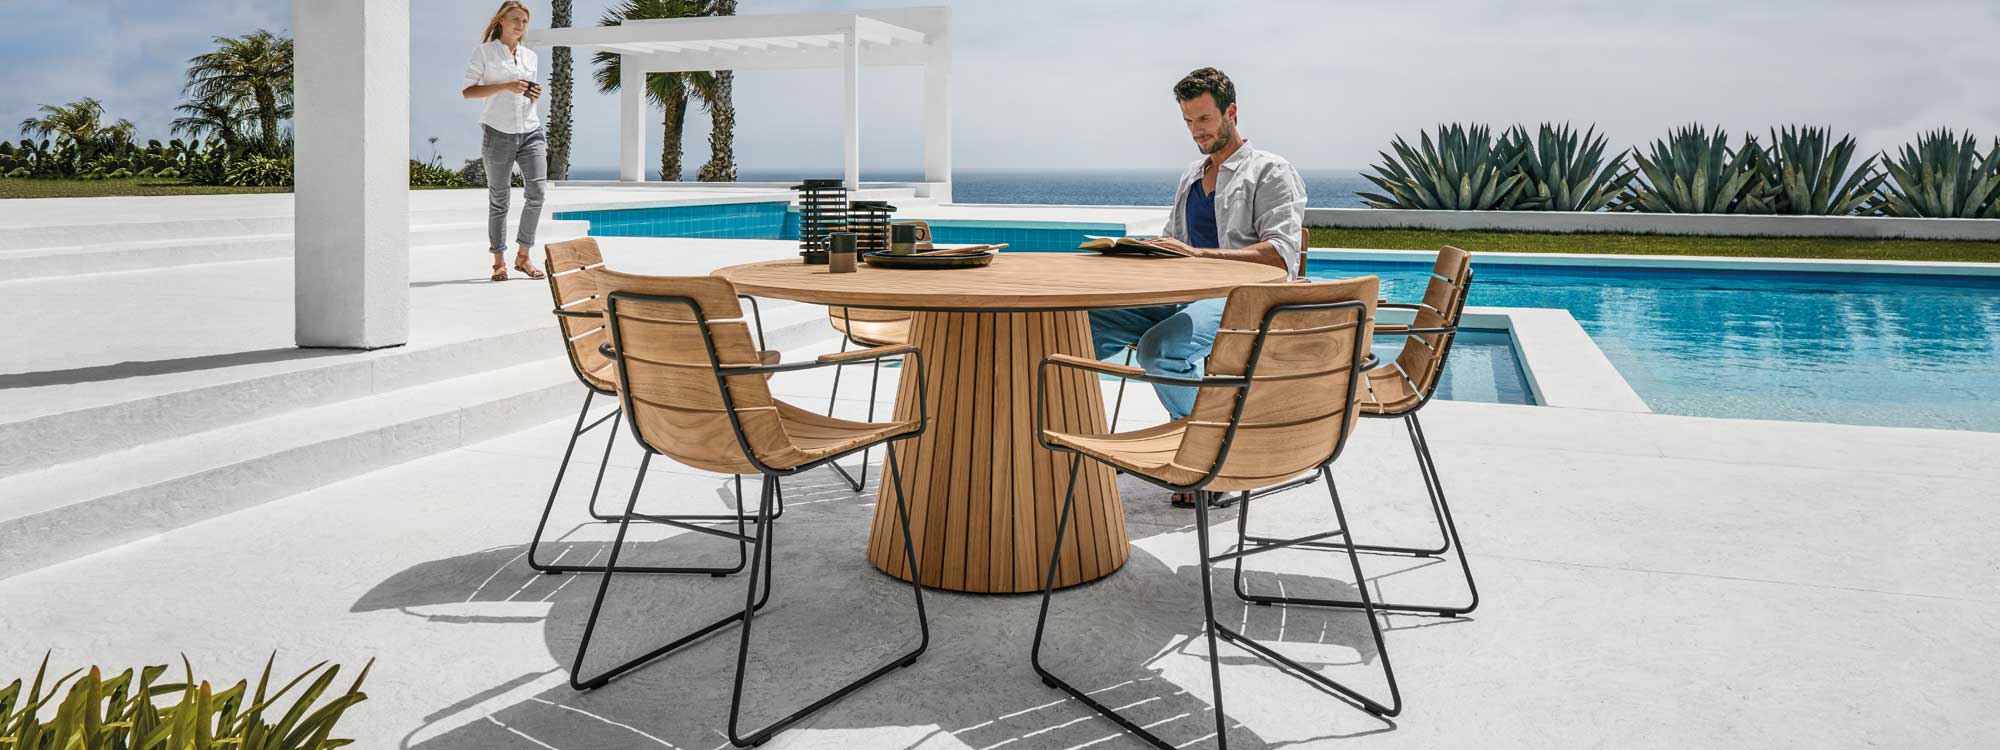 Image of man sat on William teak garden chair next to Whirl unique round table by Gloster